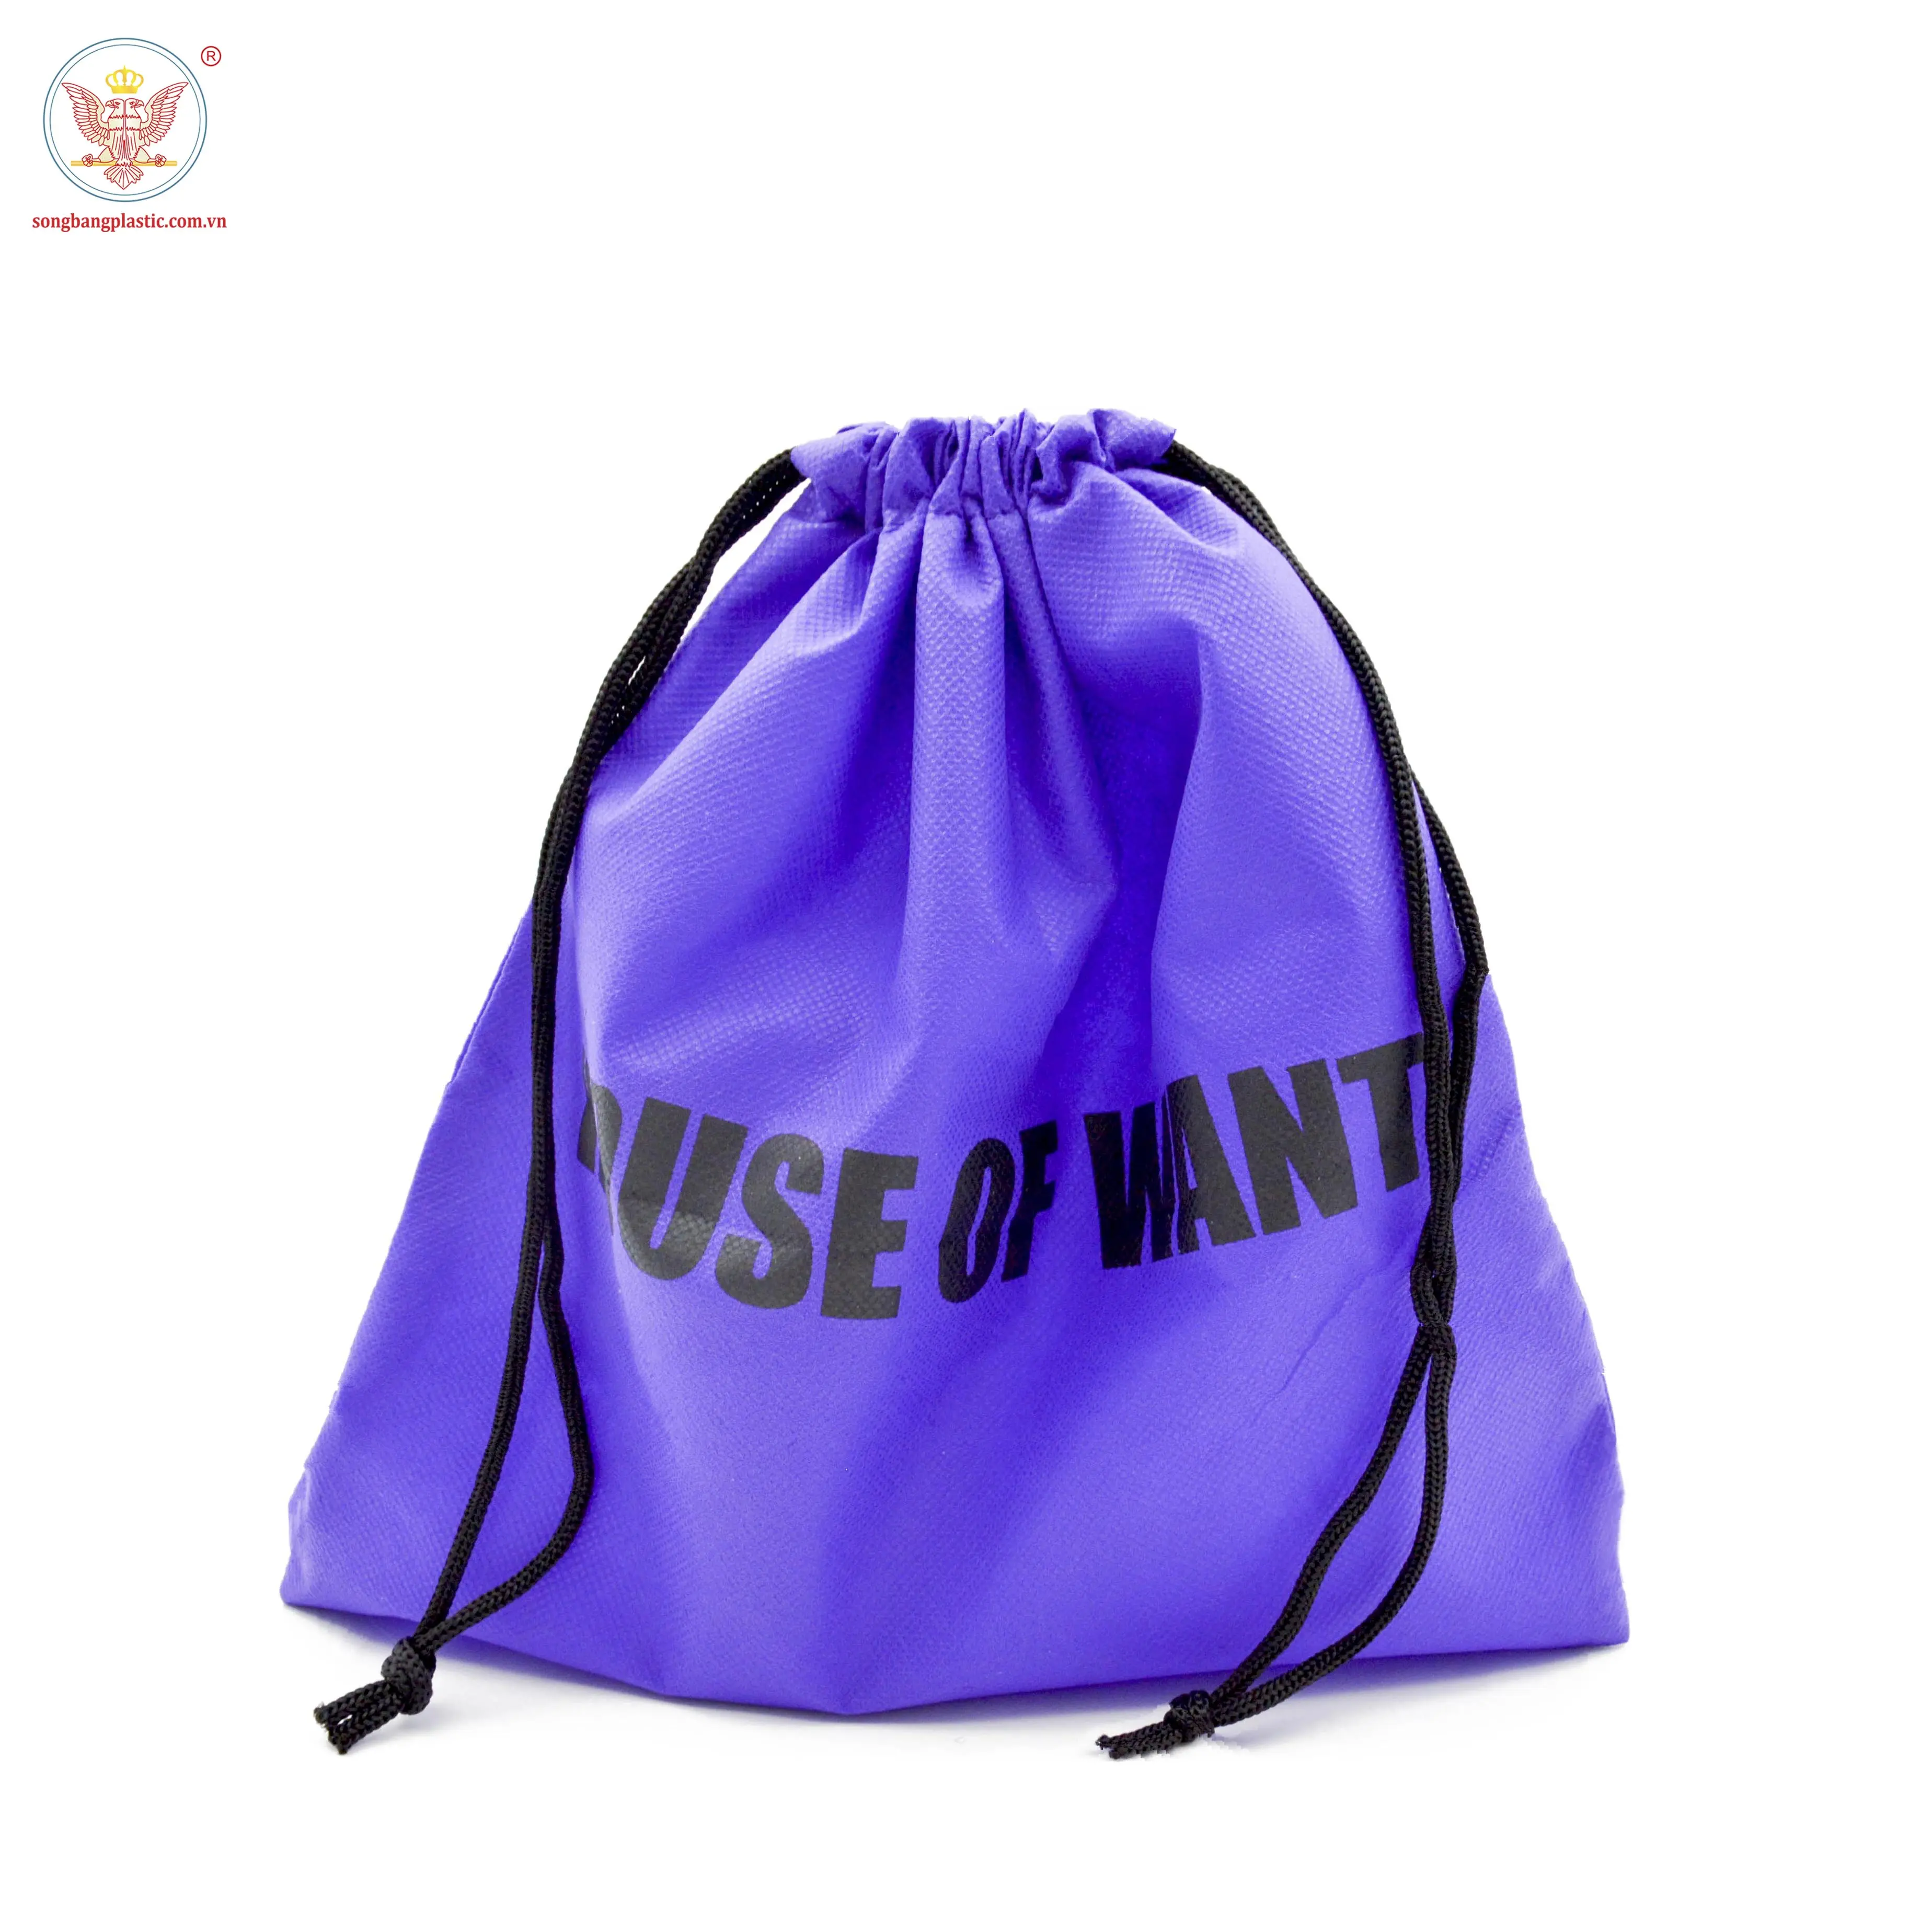 Factory Price Promotional PP Non Woven Drawstring Shopping Bags Heat Seal and Customized Color Logo Accept with cheap price